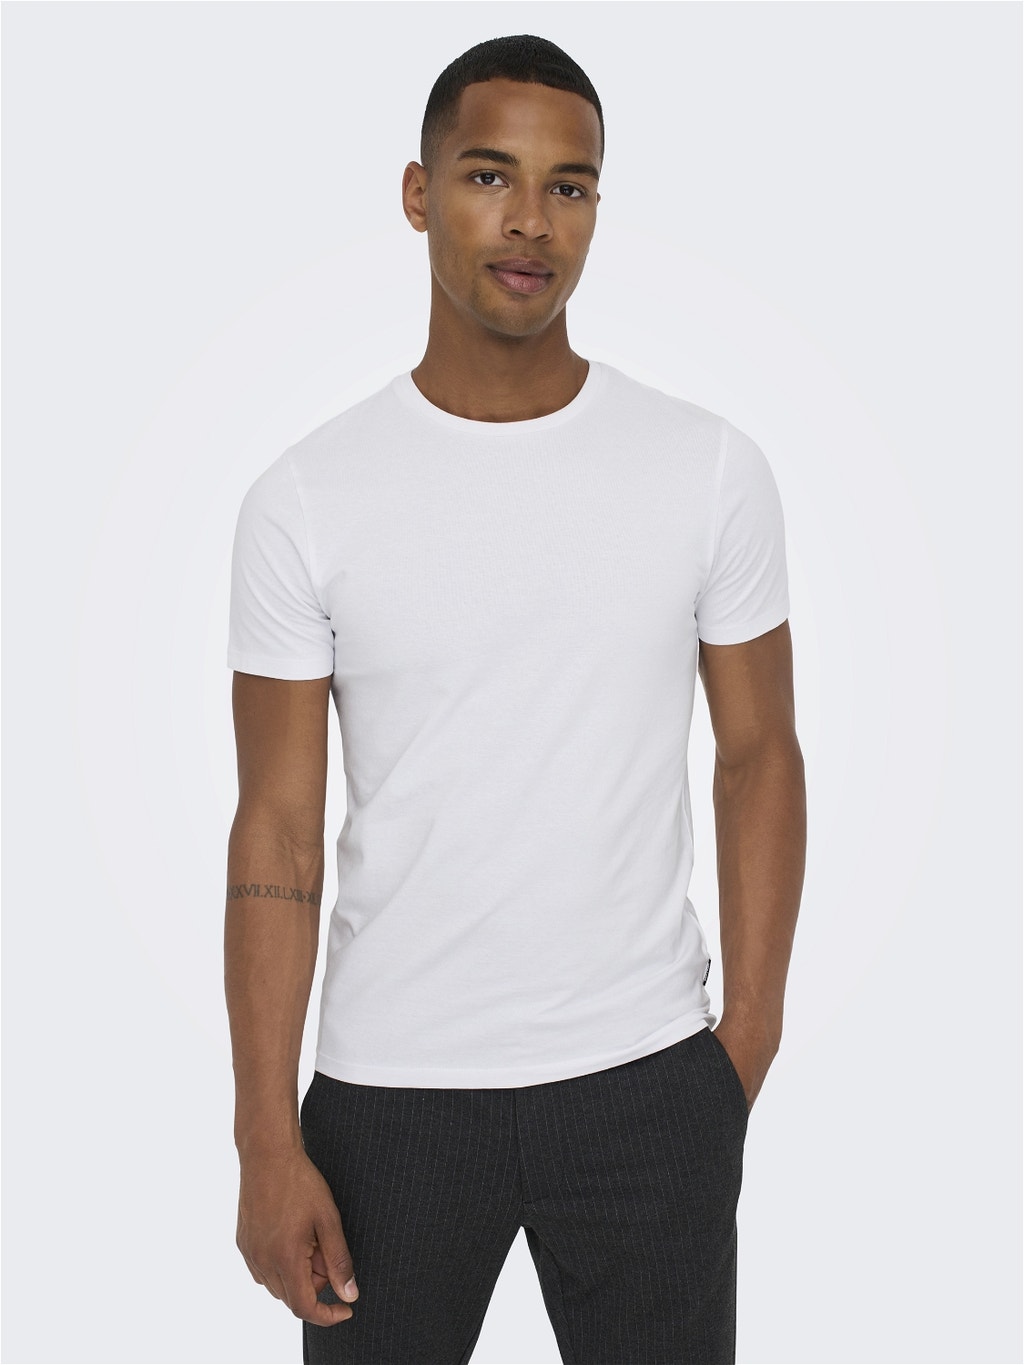 communicatie Monopoly Wegversperring Slim fit O-hals T-shirts | Wit | ONLY & SONS®